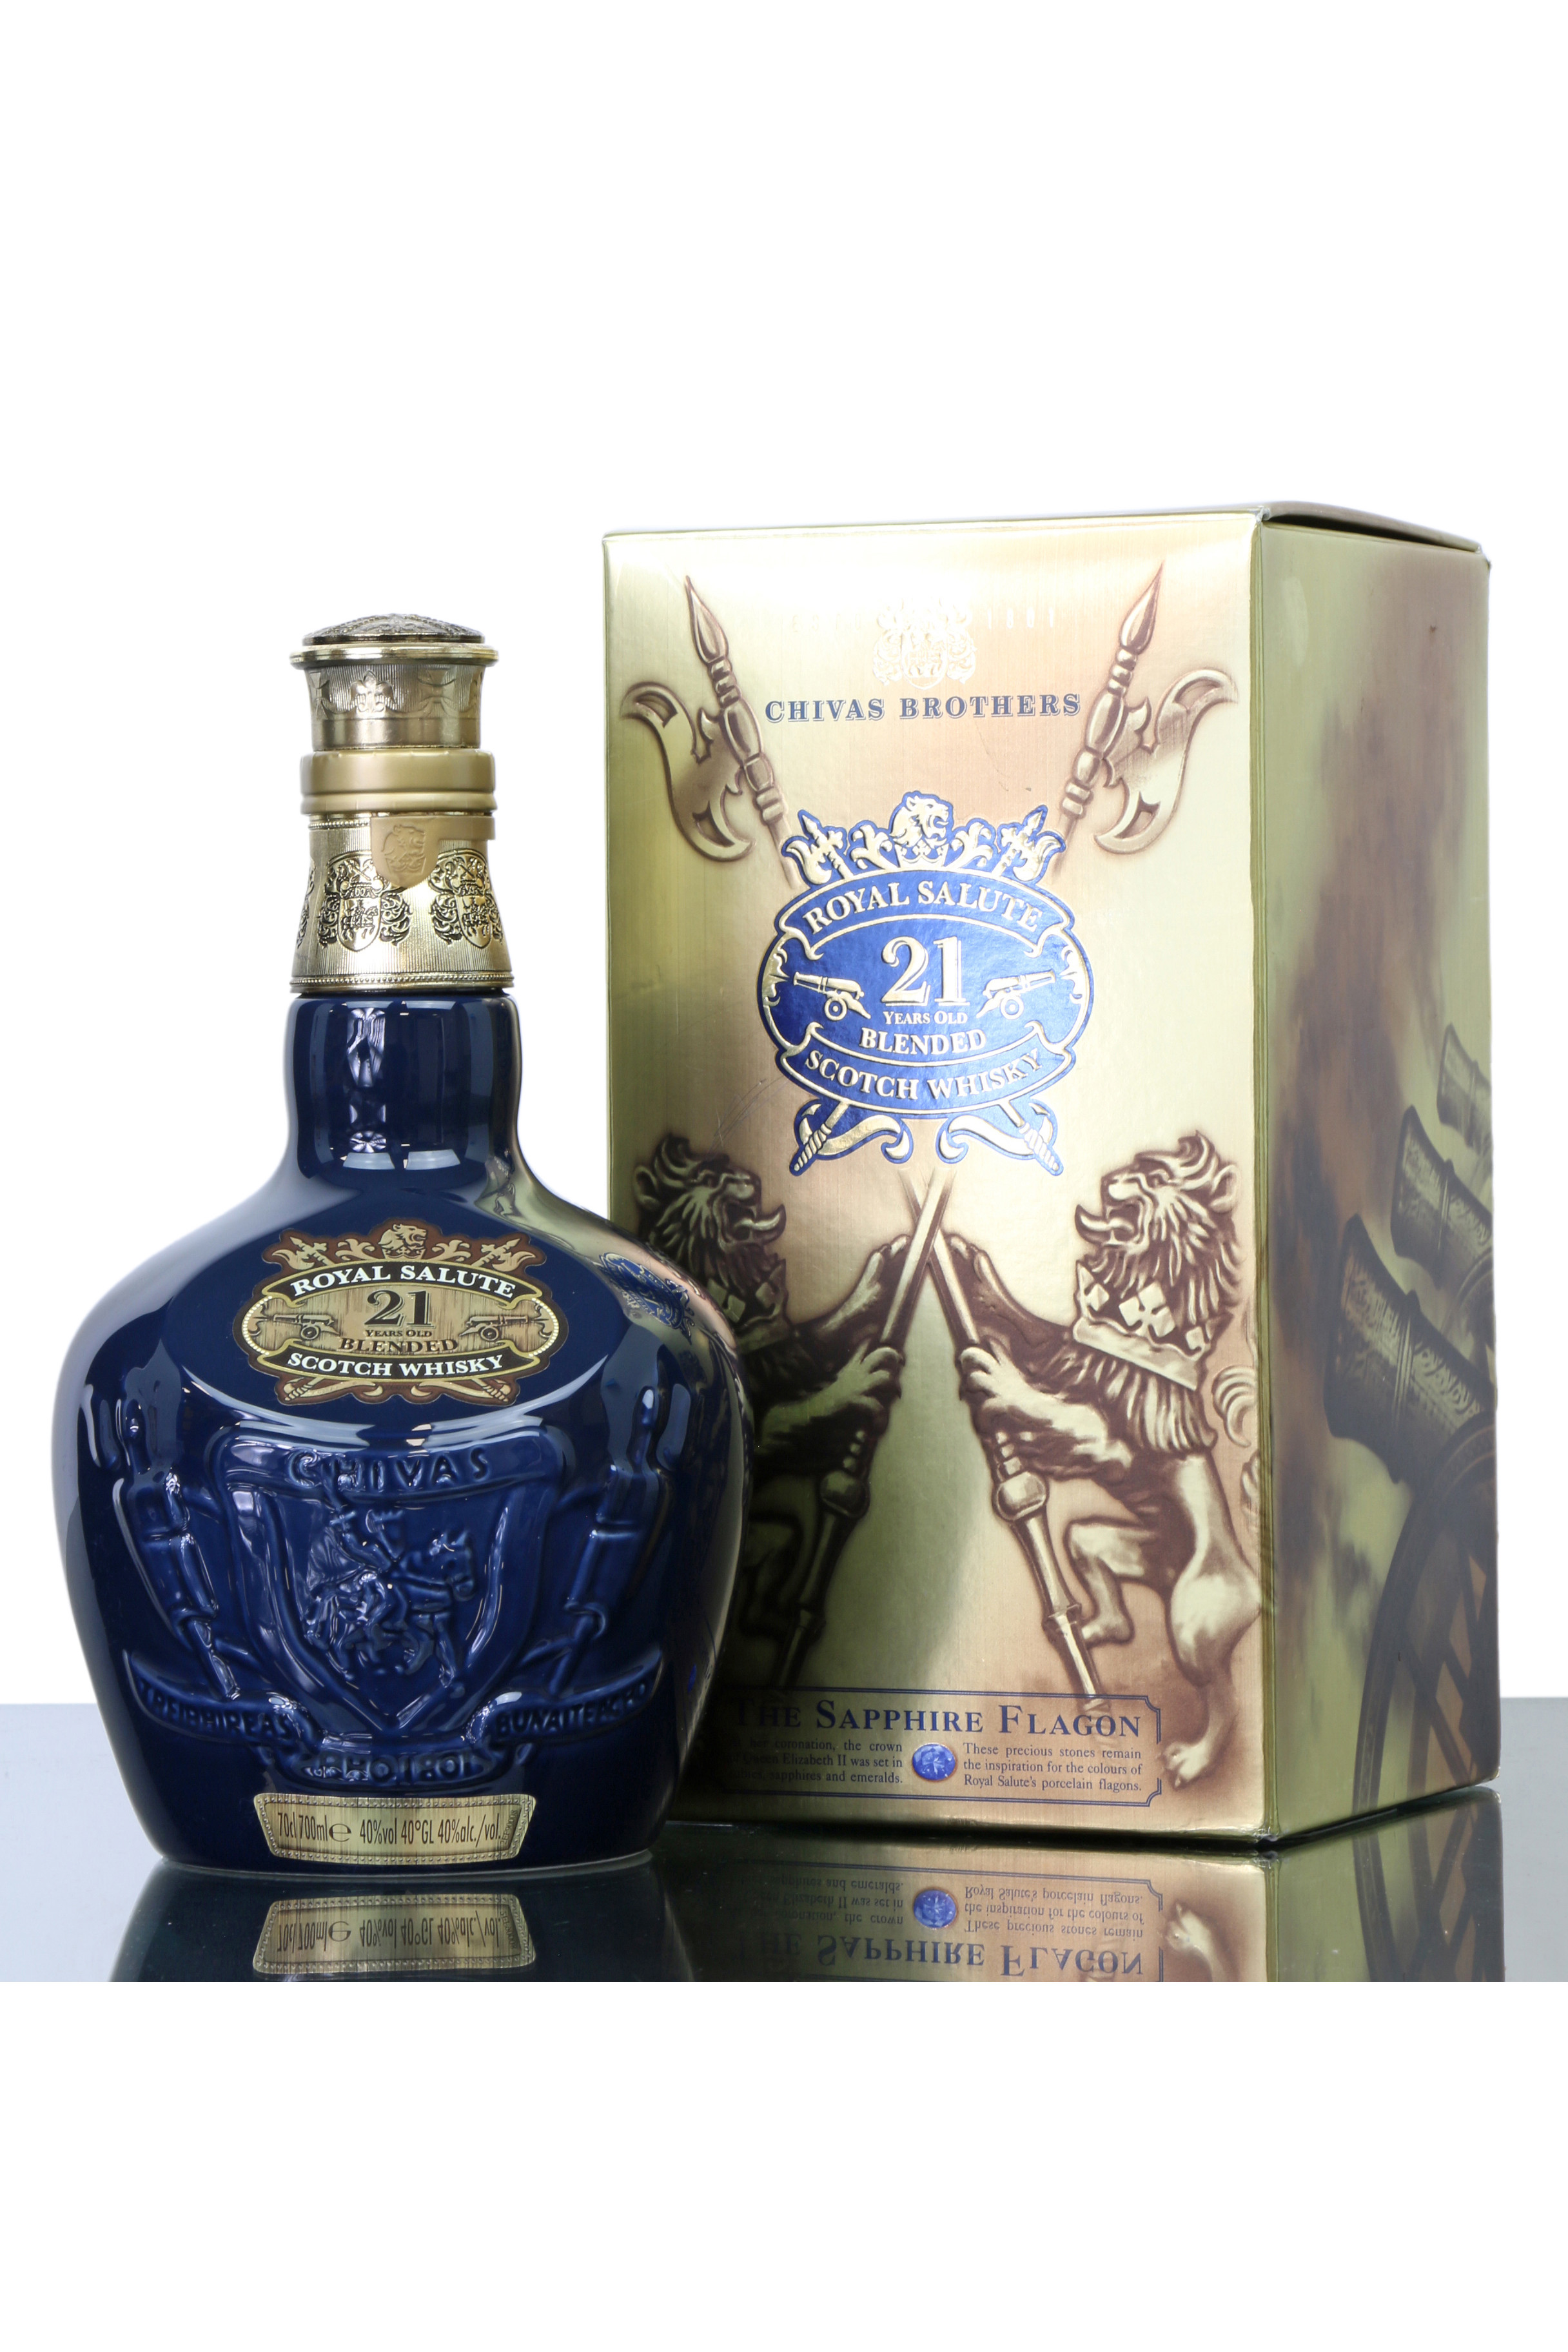 royal salute 21 special edition price